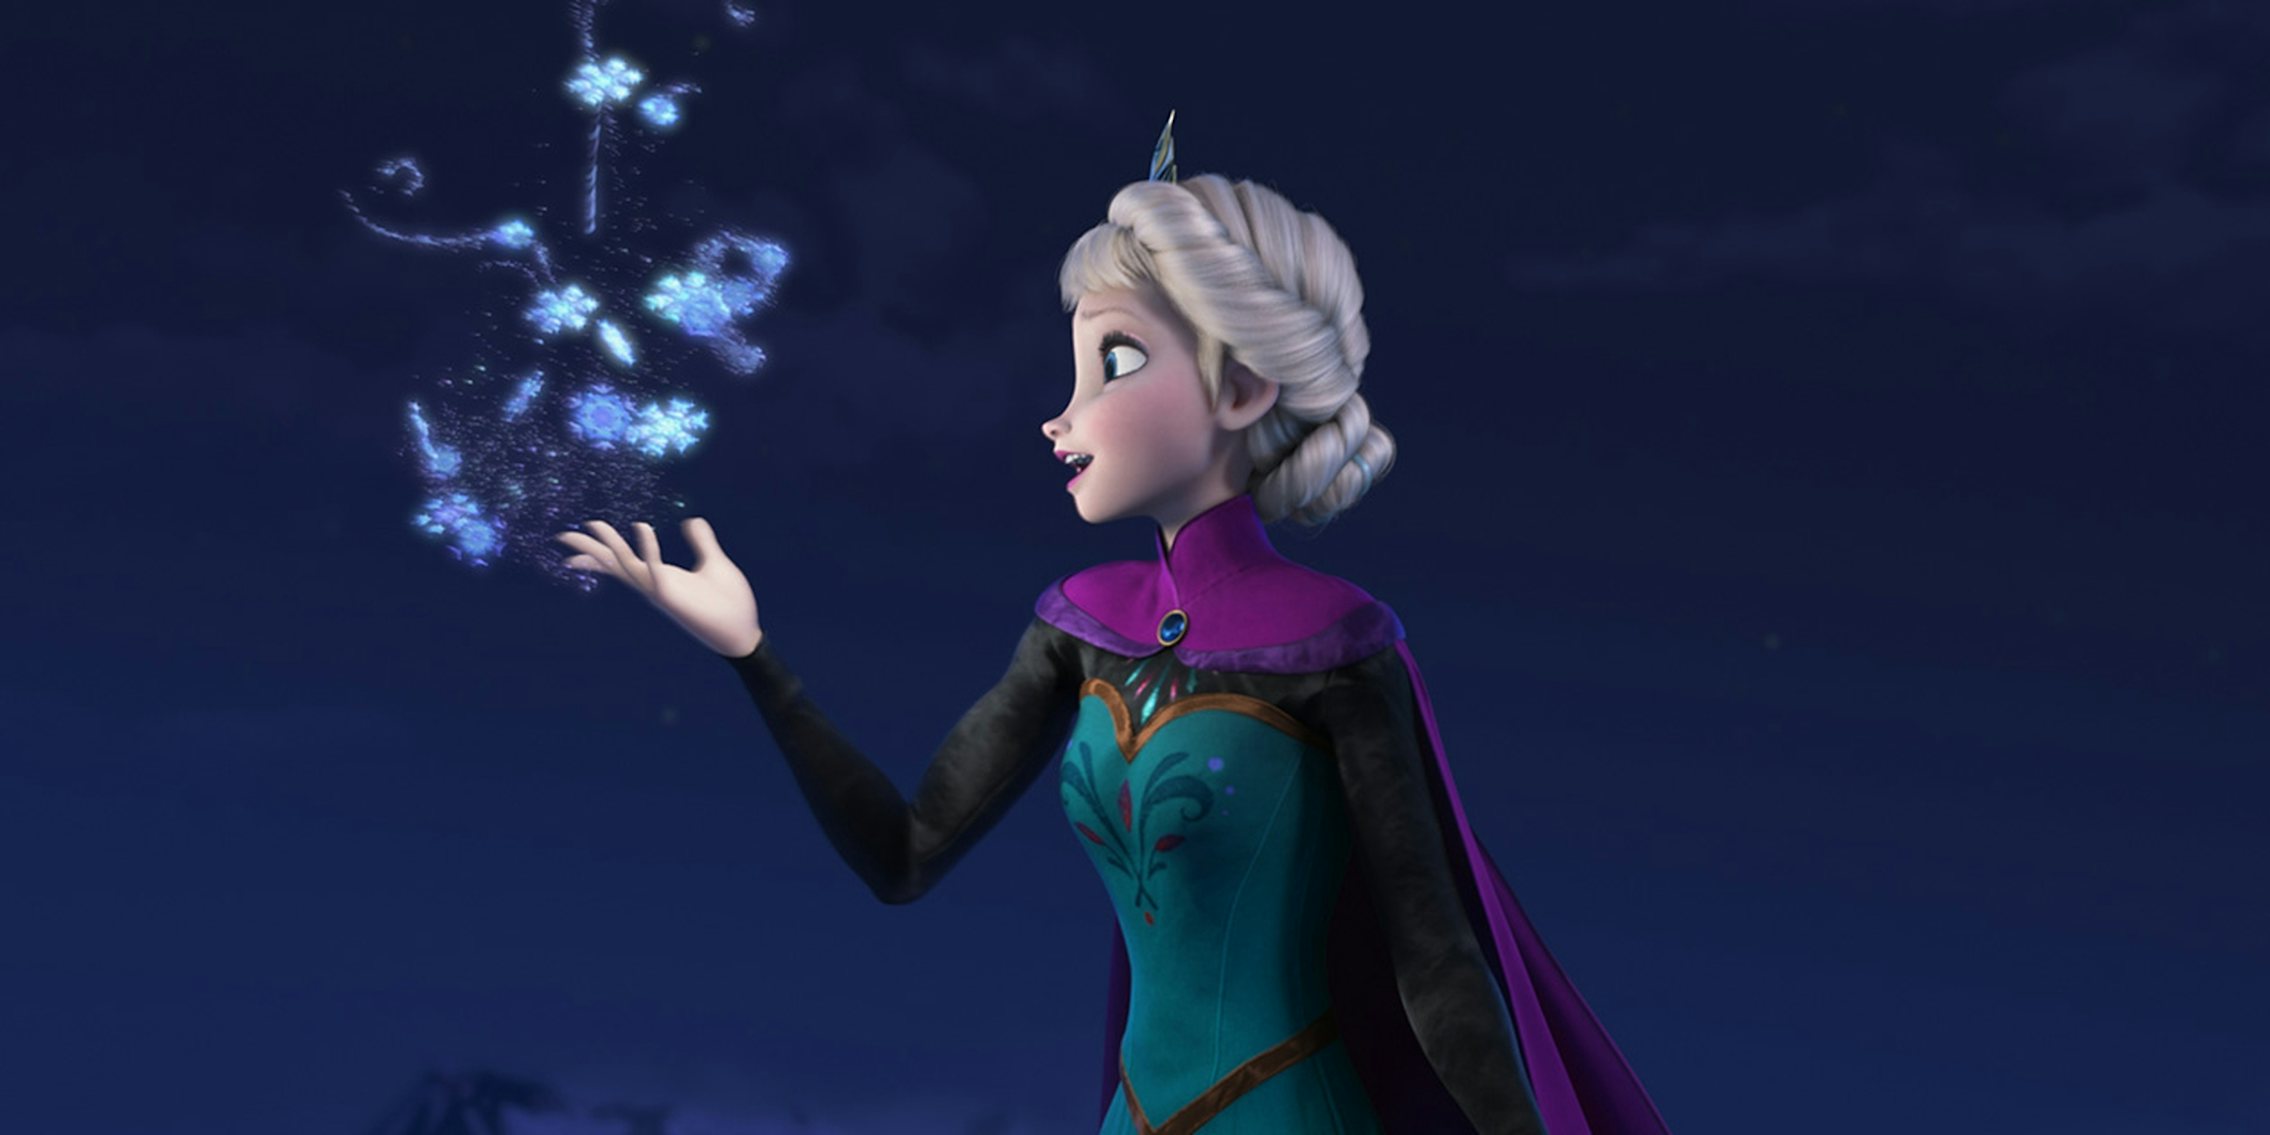 Frozen': 'Do You Want to Build a Snow' Nearly Cut From Movie